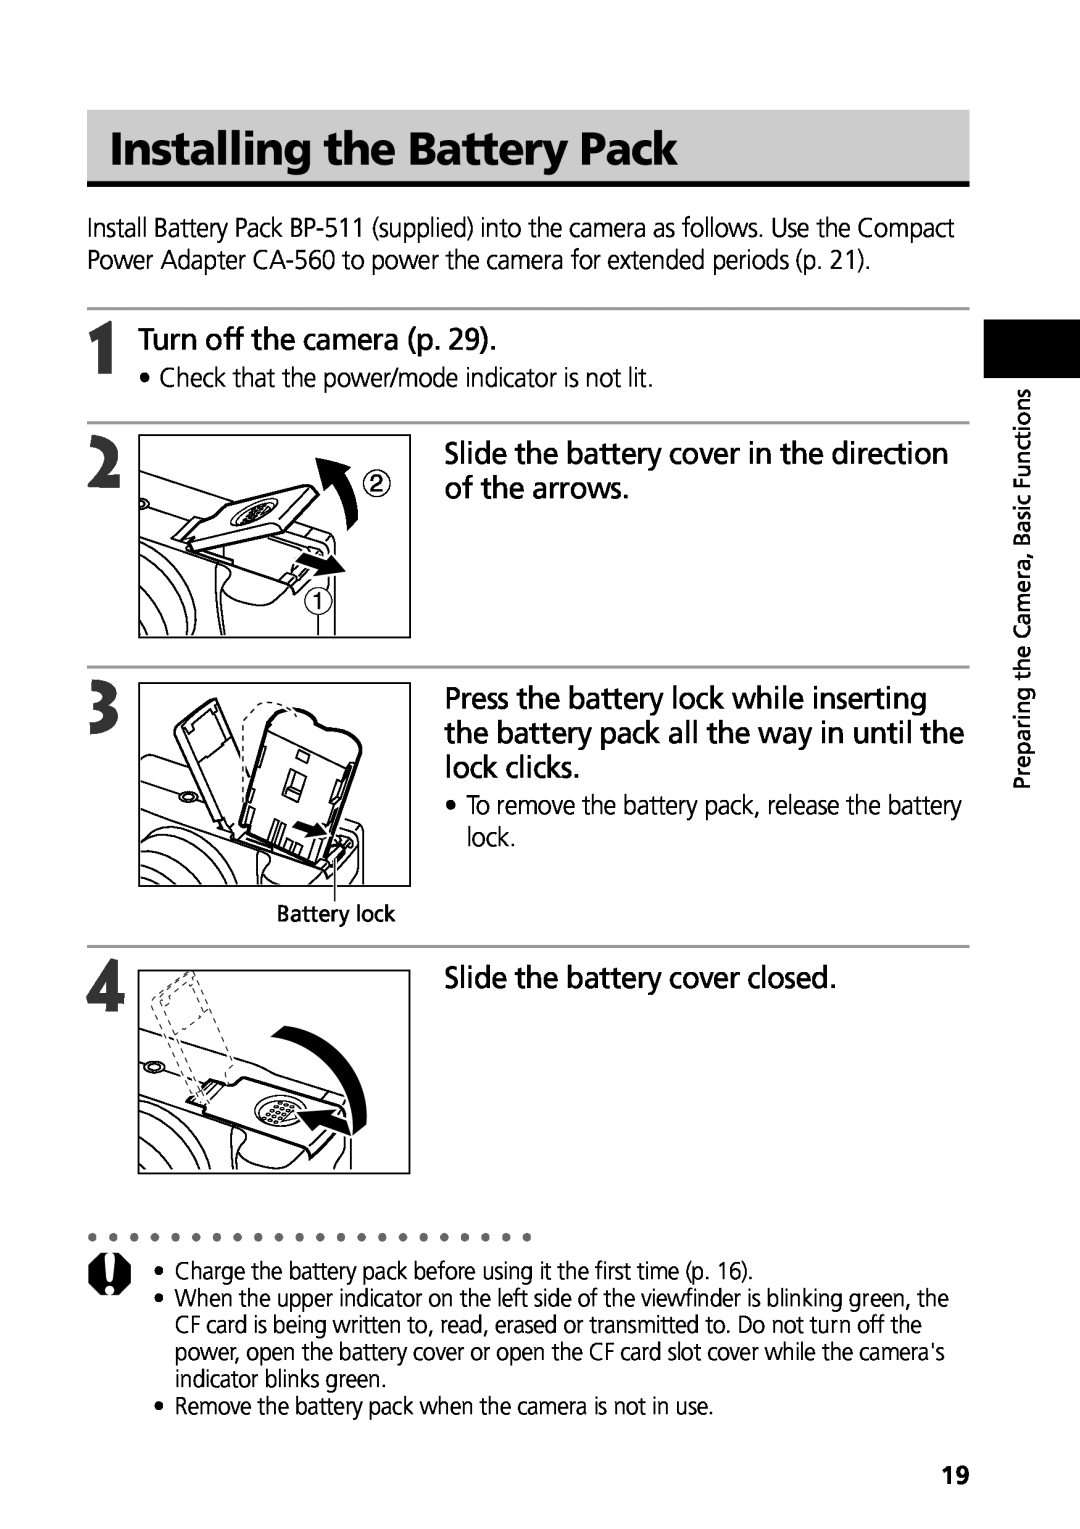 Canon G3 manual Installing the Battery Pack, Turn off the camera p, Slide the battery cover in the direction, of the arrows 